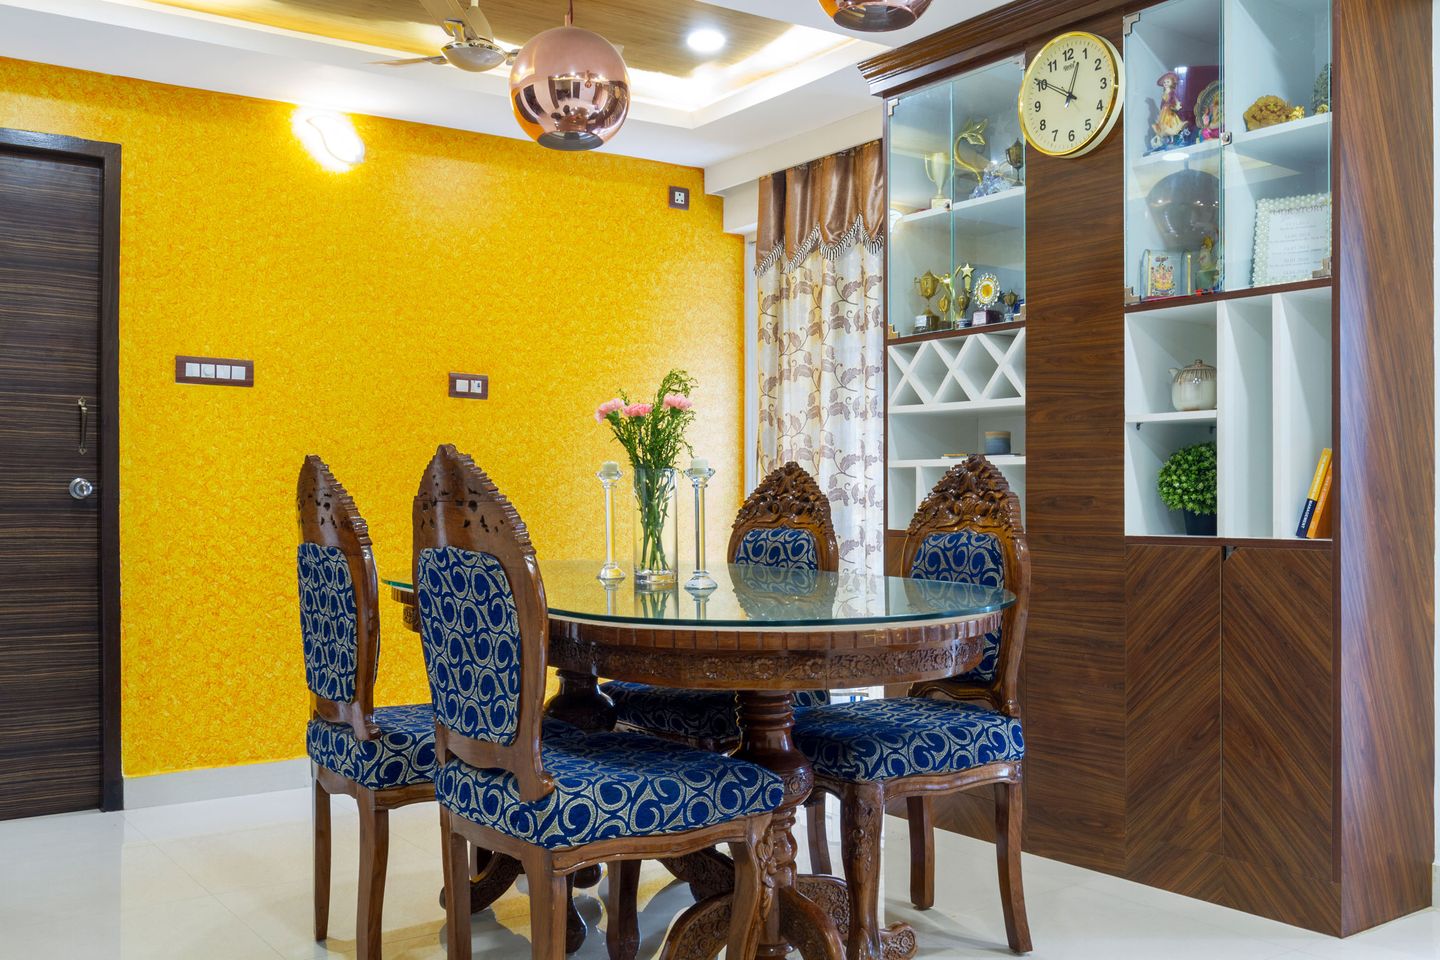 4-Seater Dining Room With With Blue Cushioned Chairs And Bright Yellow Wall Paint - Livspace